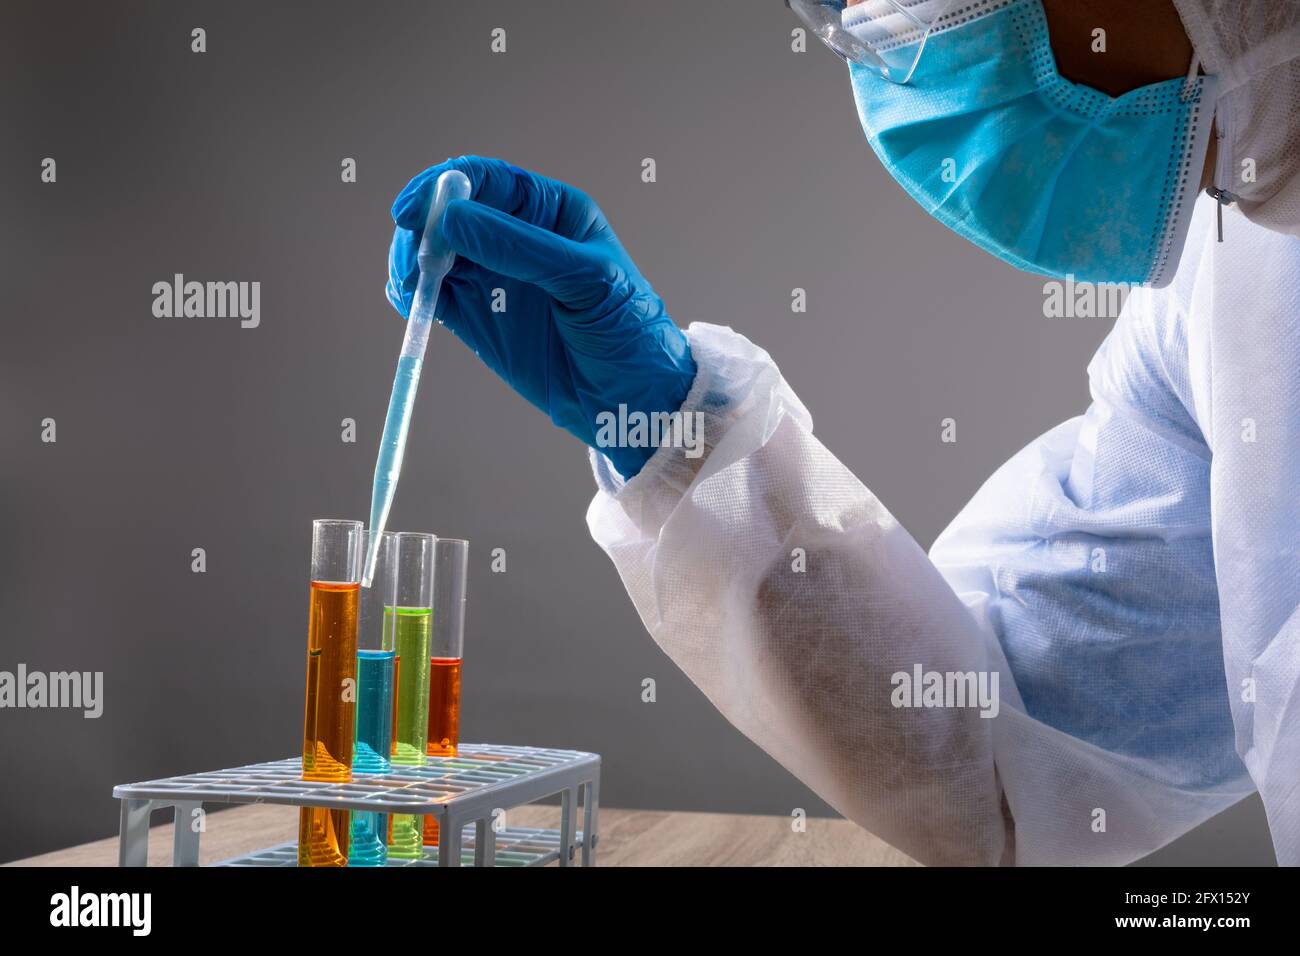 Mid section of health worker wearing face mask working with chemicals in test tubes Stock Photo